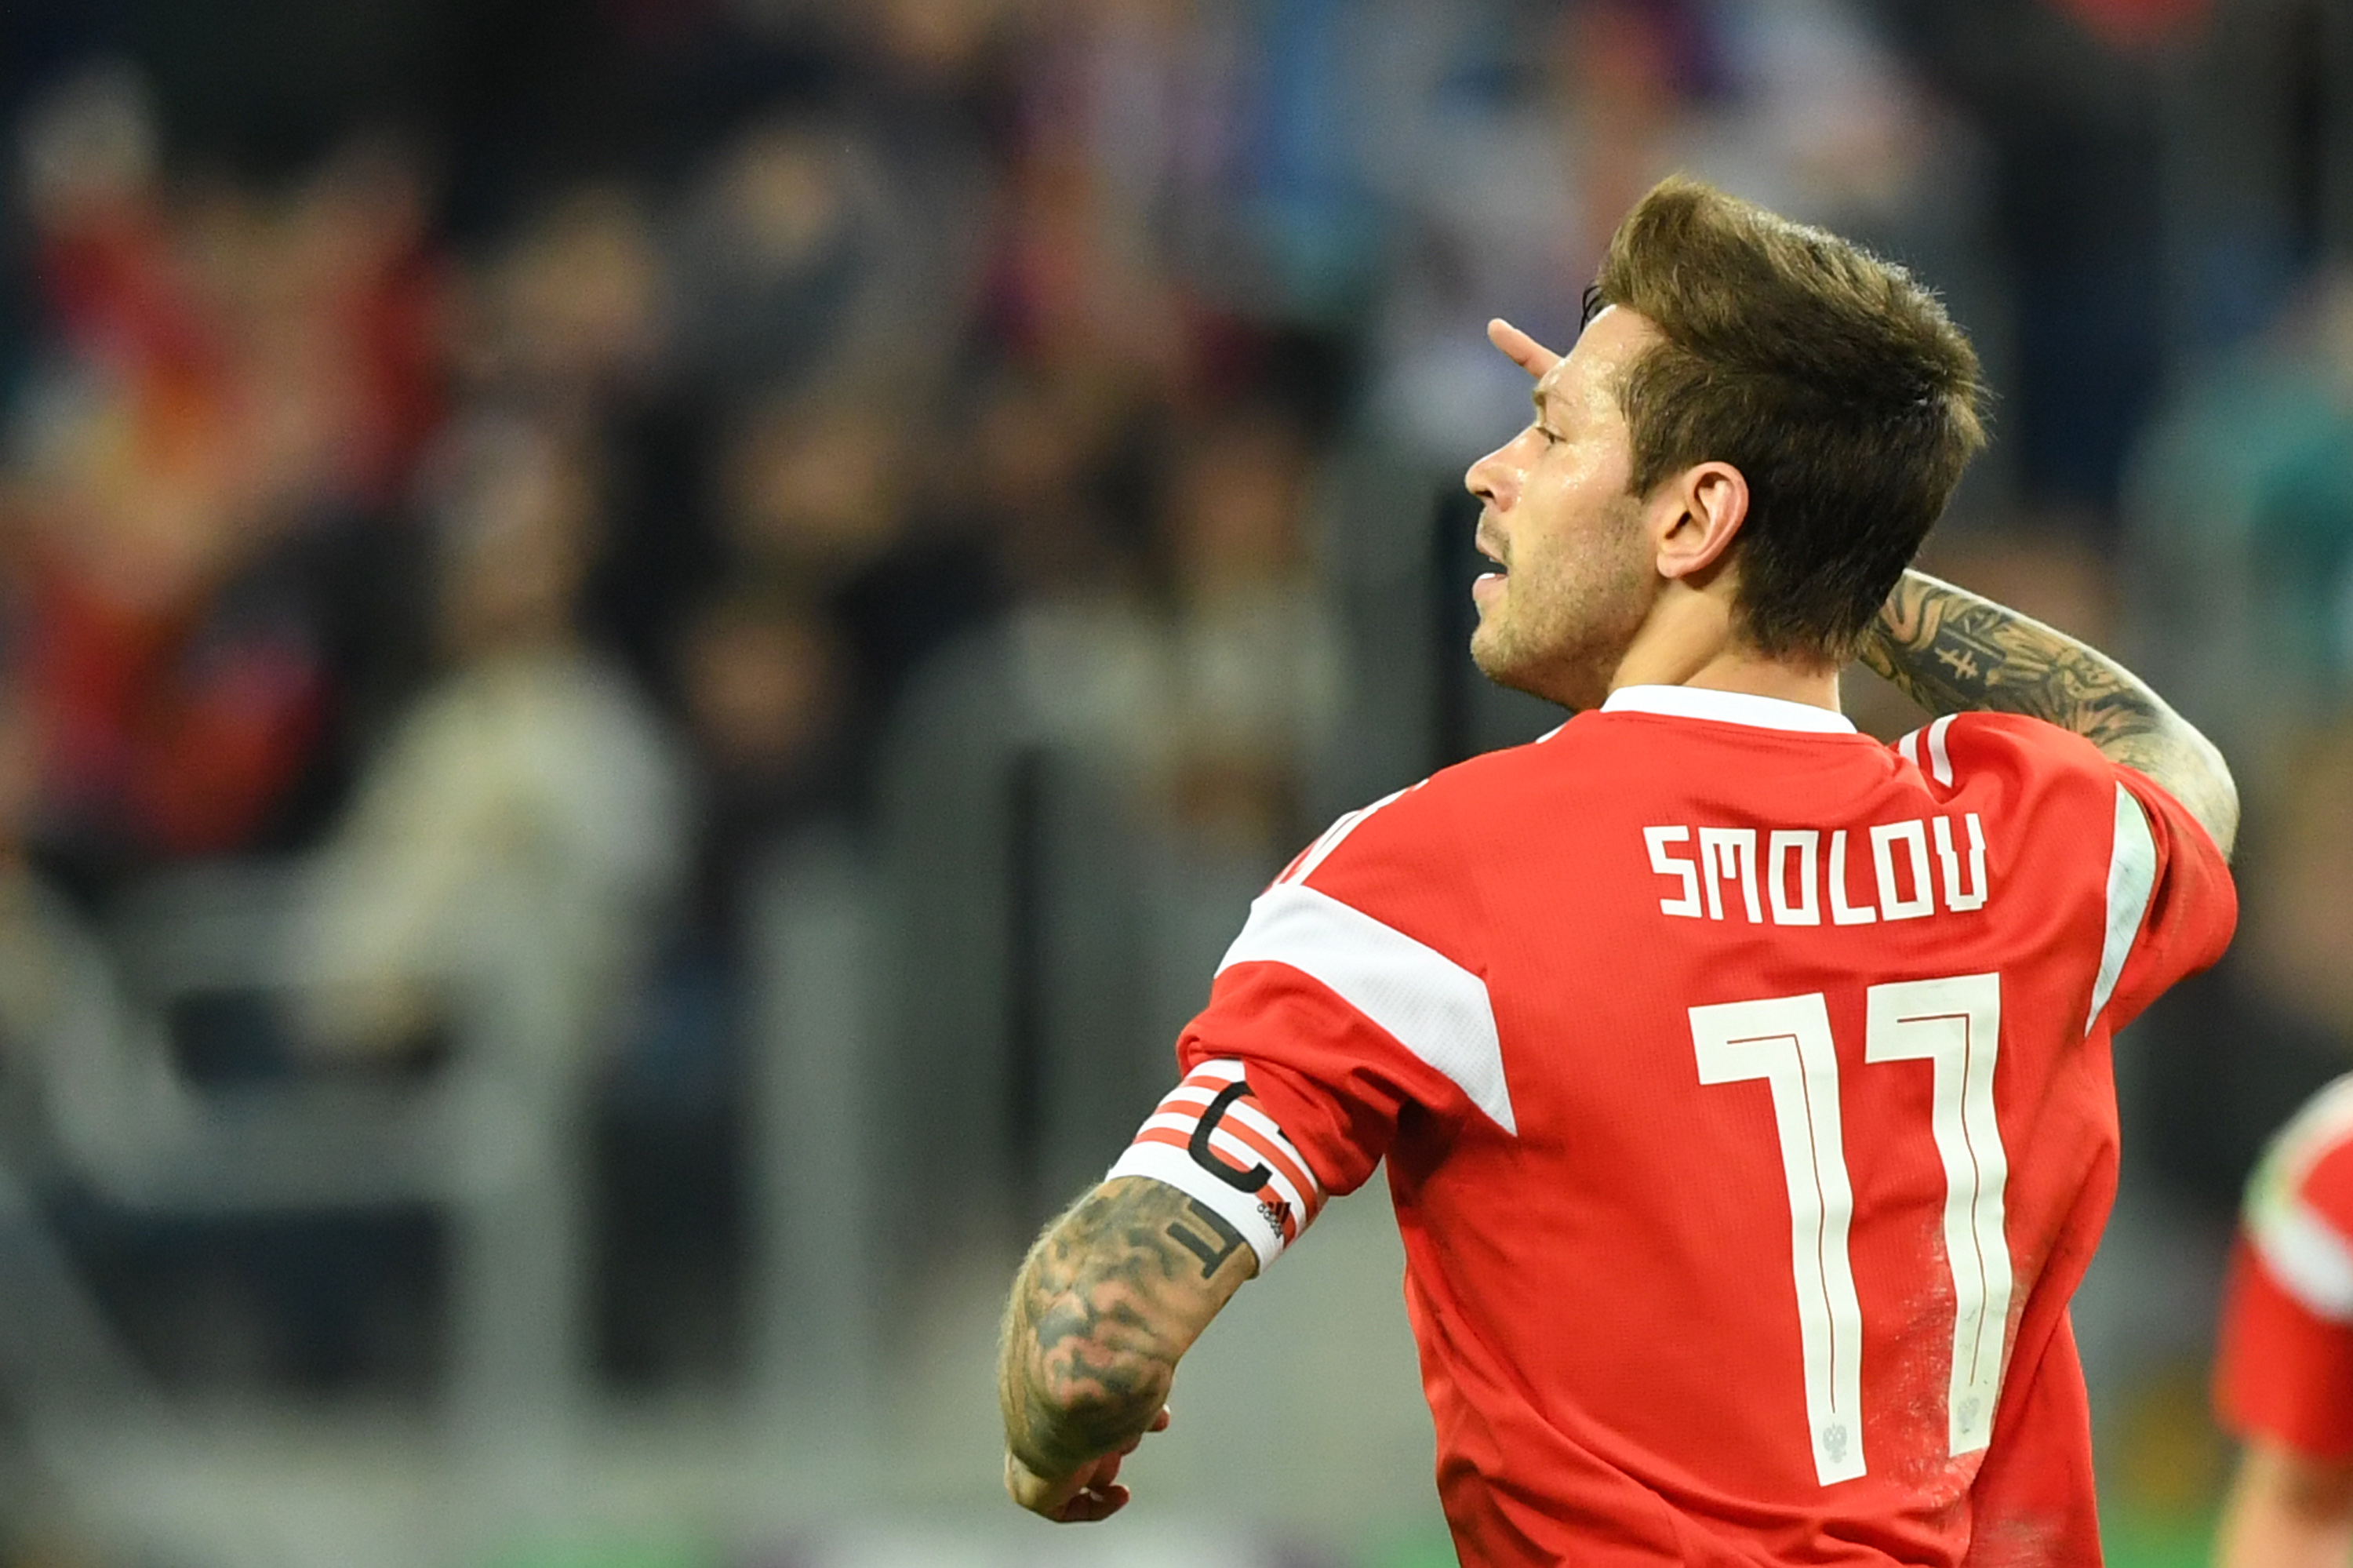 Russia's Fedor Smolov celebrates after scoring the team's third goal during an international friendly football match between Russia and Spain at the Saint Petersburg Stadium in Saint Petersburg on November 14, 2017. / AFP PHOTO / Kirill KUDRYAVTSEV        (Photo credit should read KIRILL KUDRYAVTSEV/AFP/Getty Images)